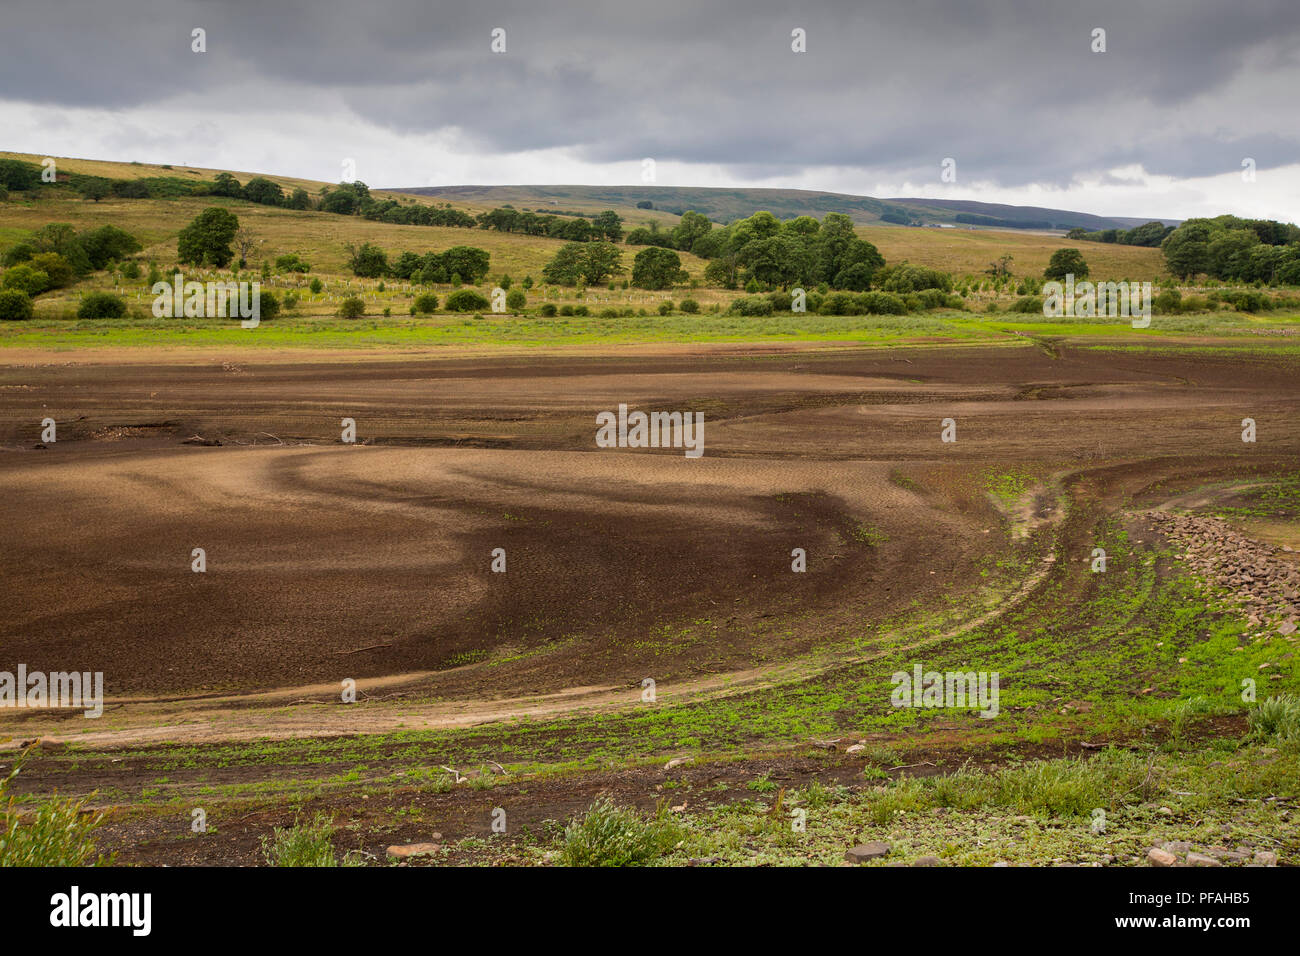 Stocks Reservoir in Bowland, Lancashire, drying up due to the ongoing drought, July 2018. Stock Photo